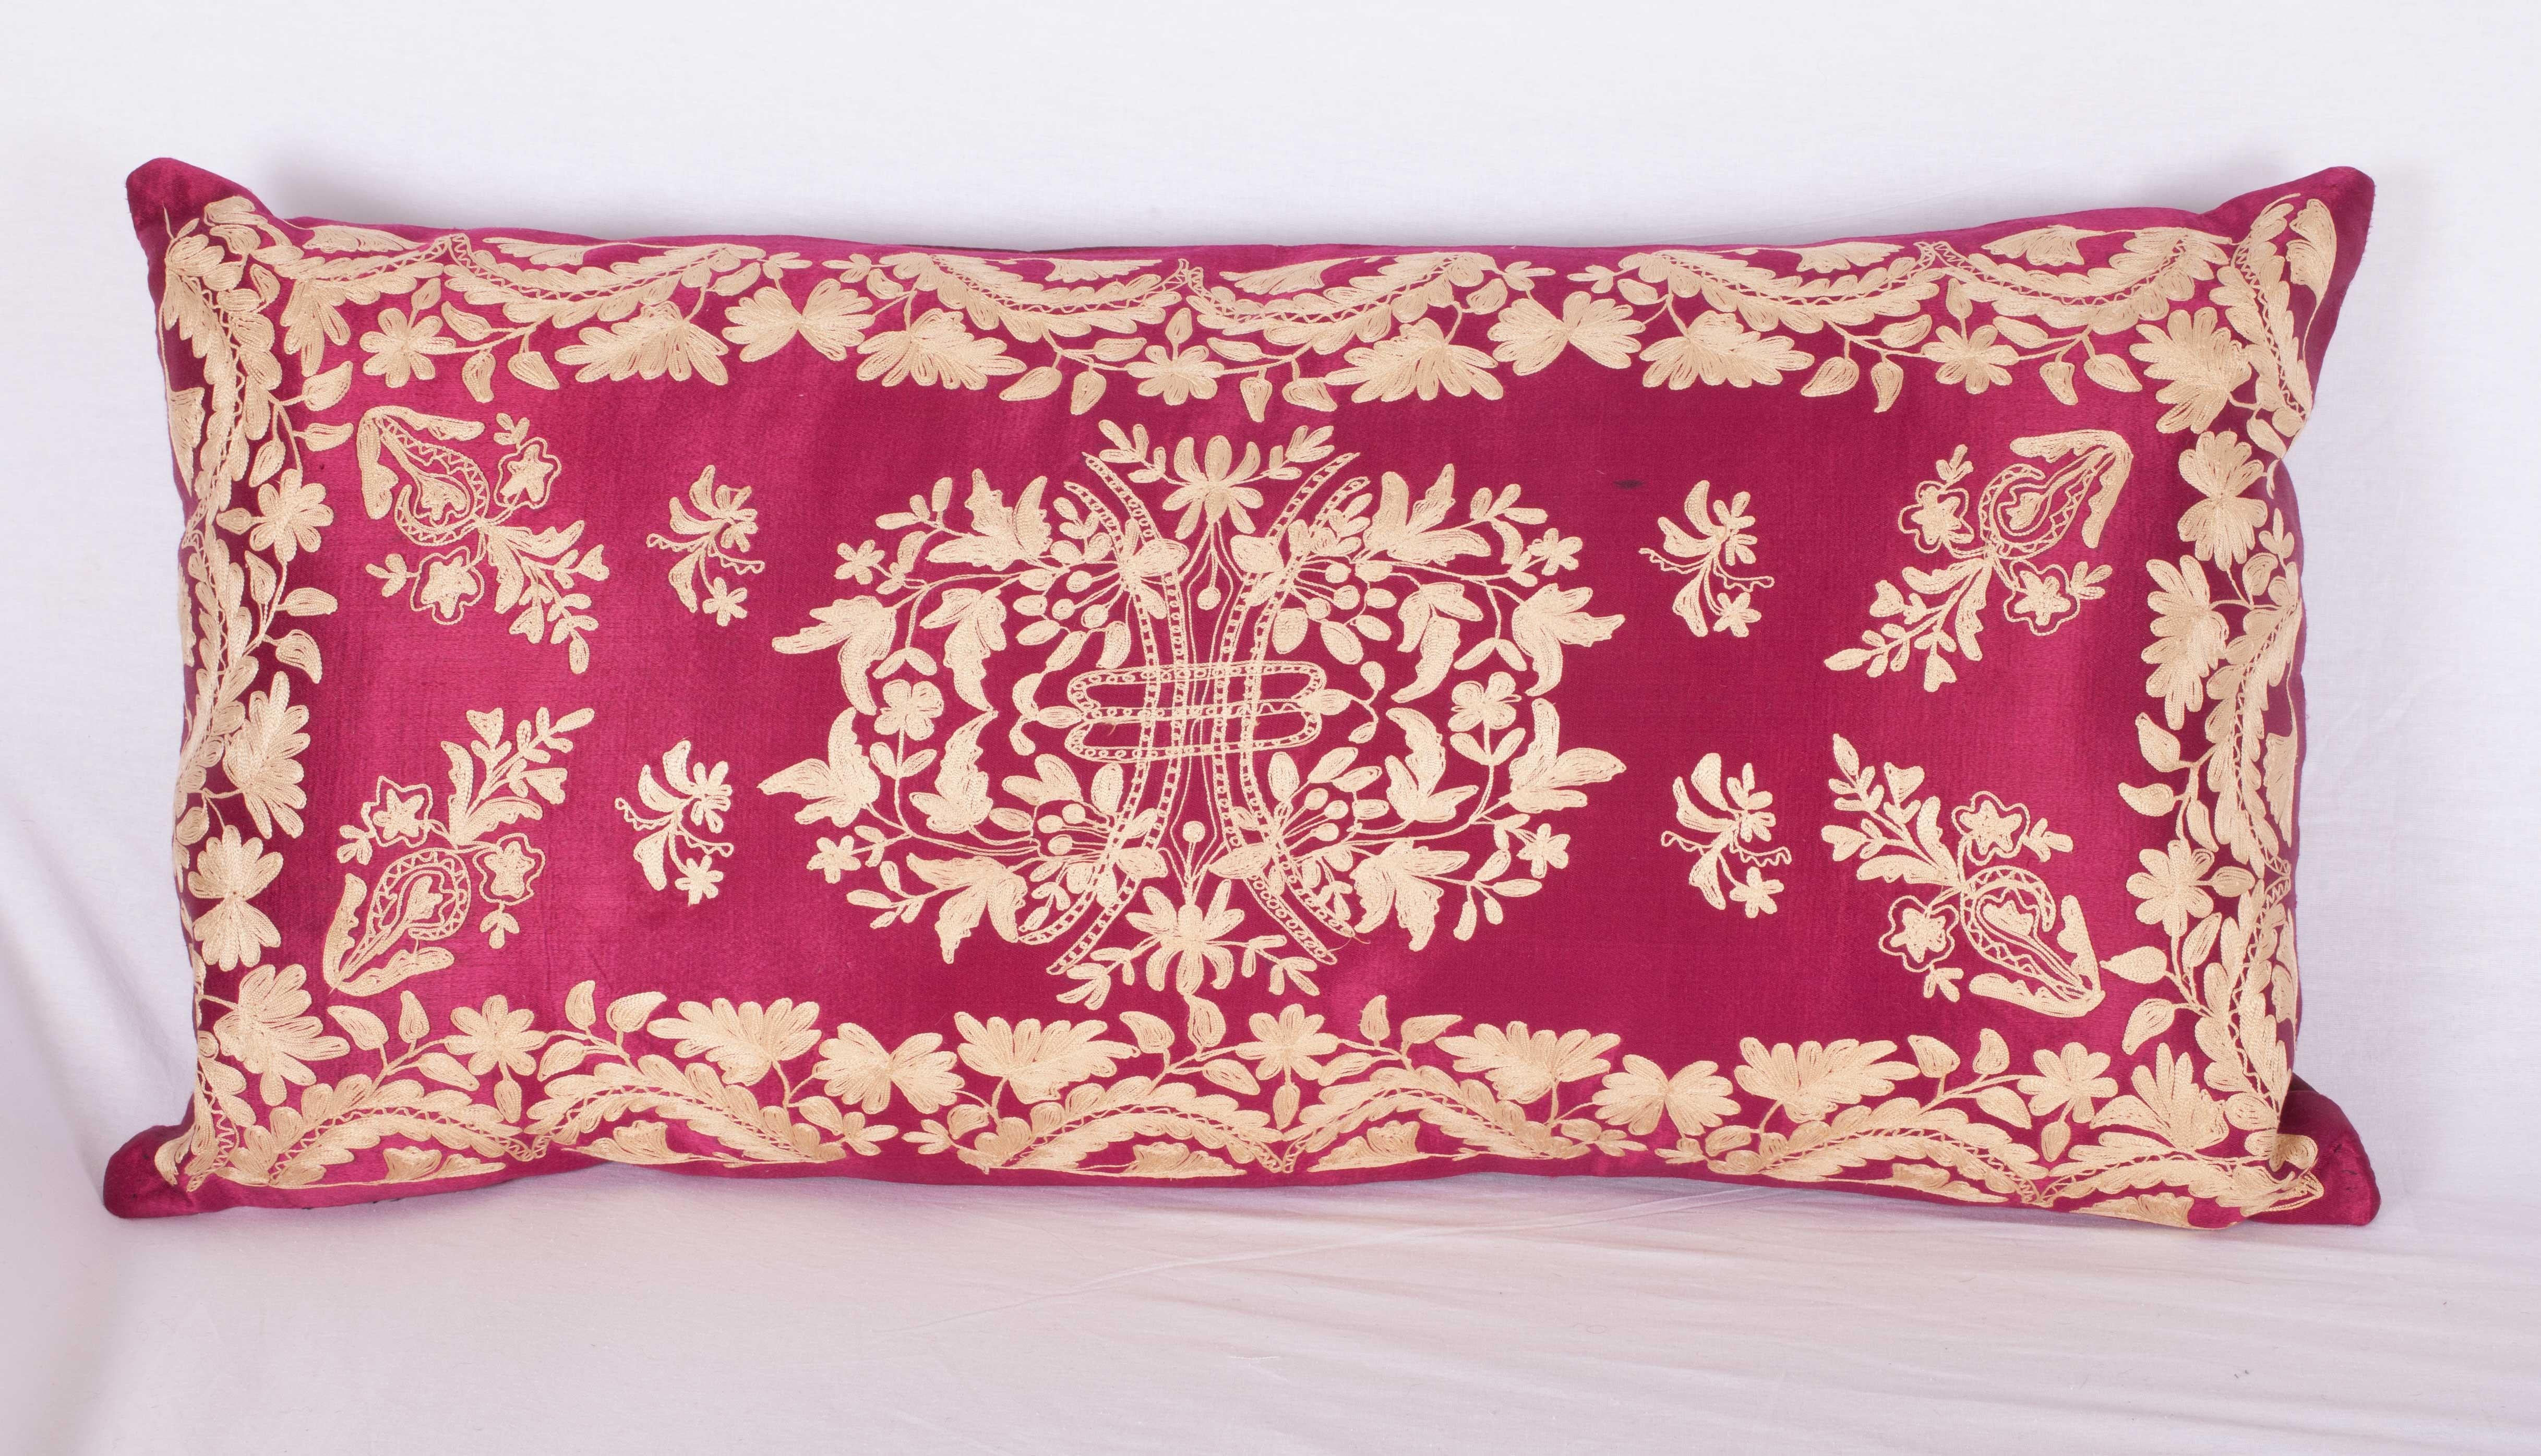 Suzani Antique Ottoman Turkish Pillow Cases Late 19th-Early 20th Century For Sale